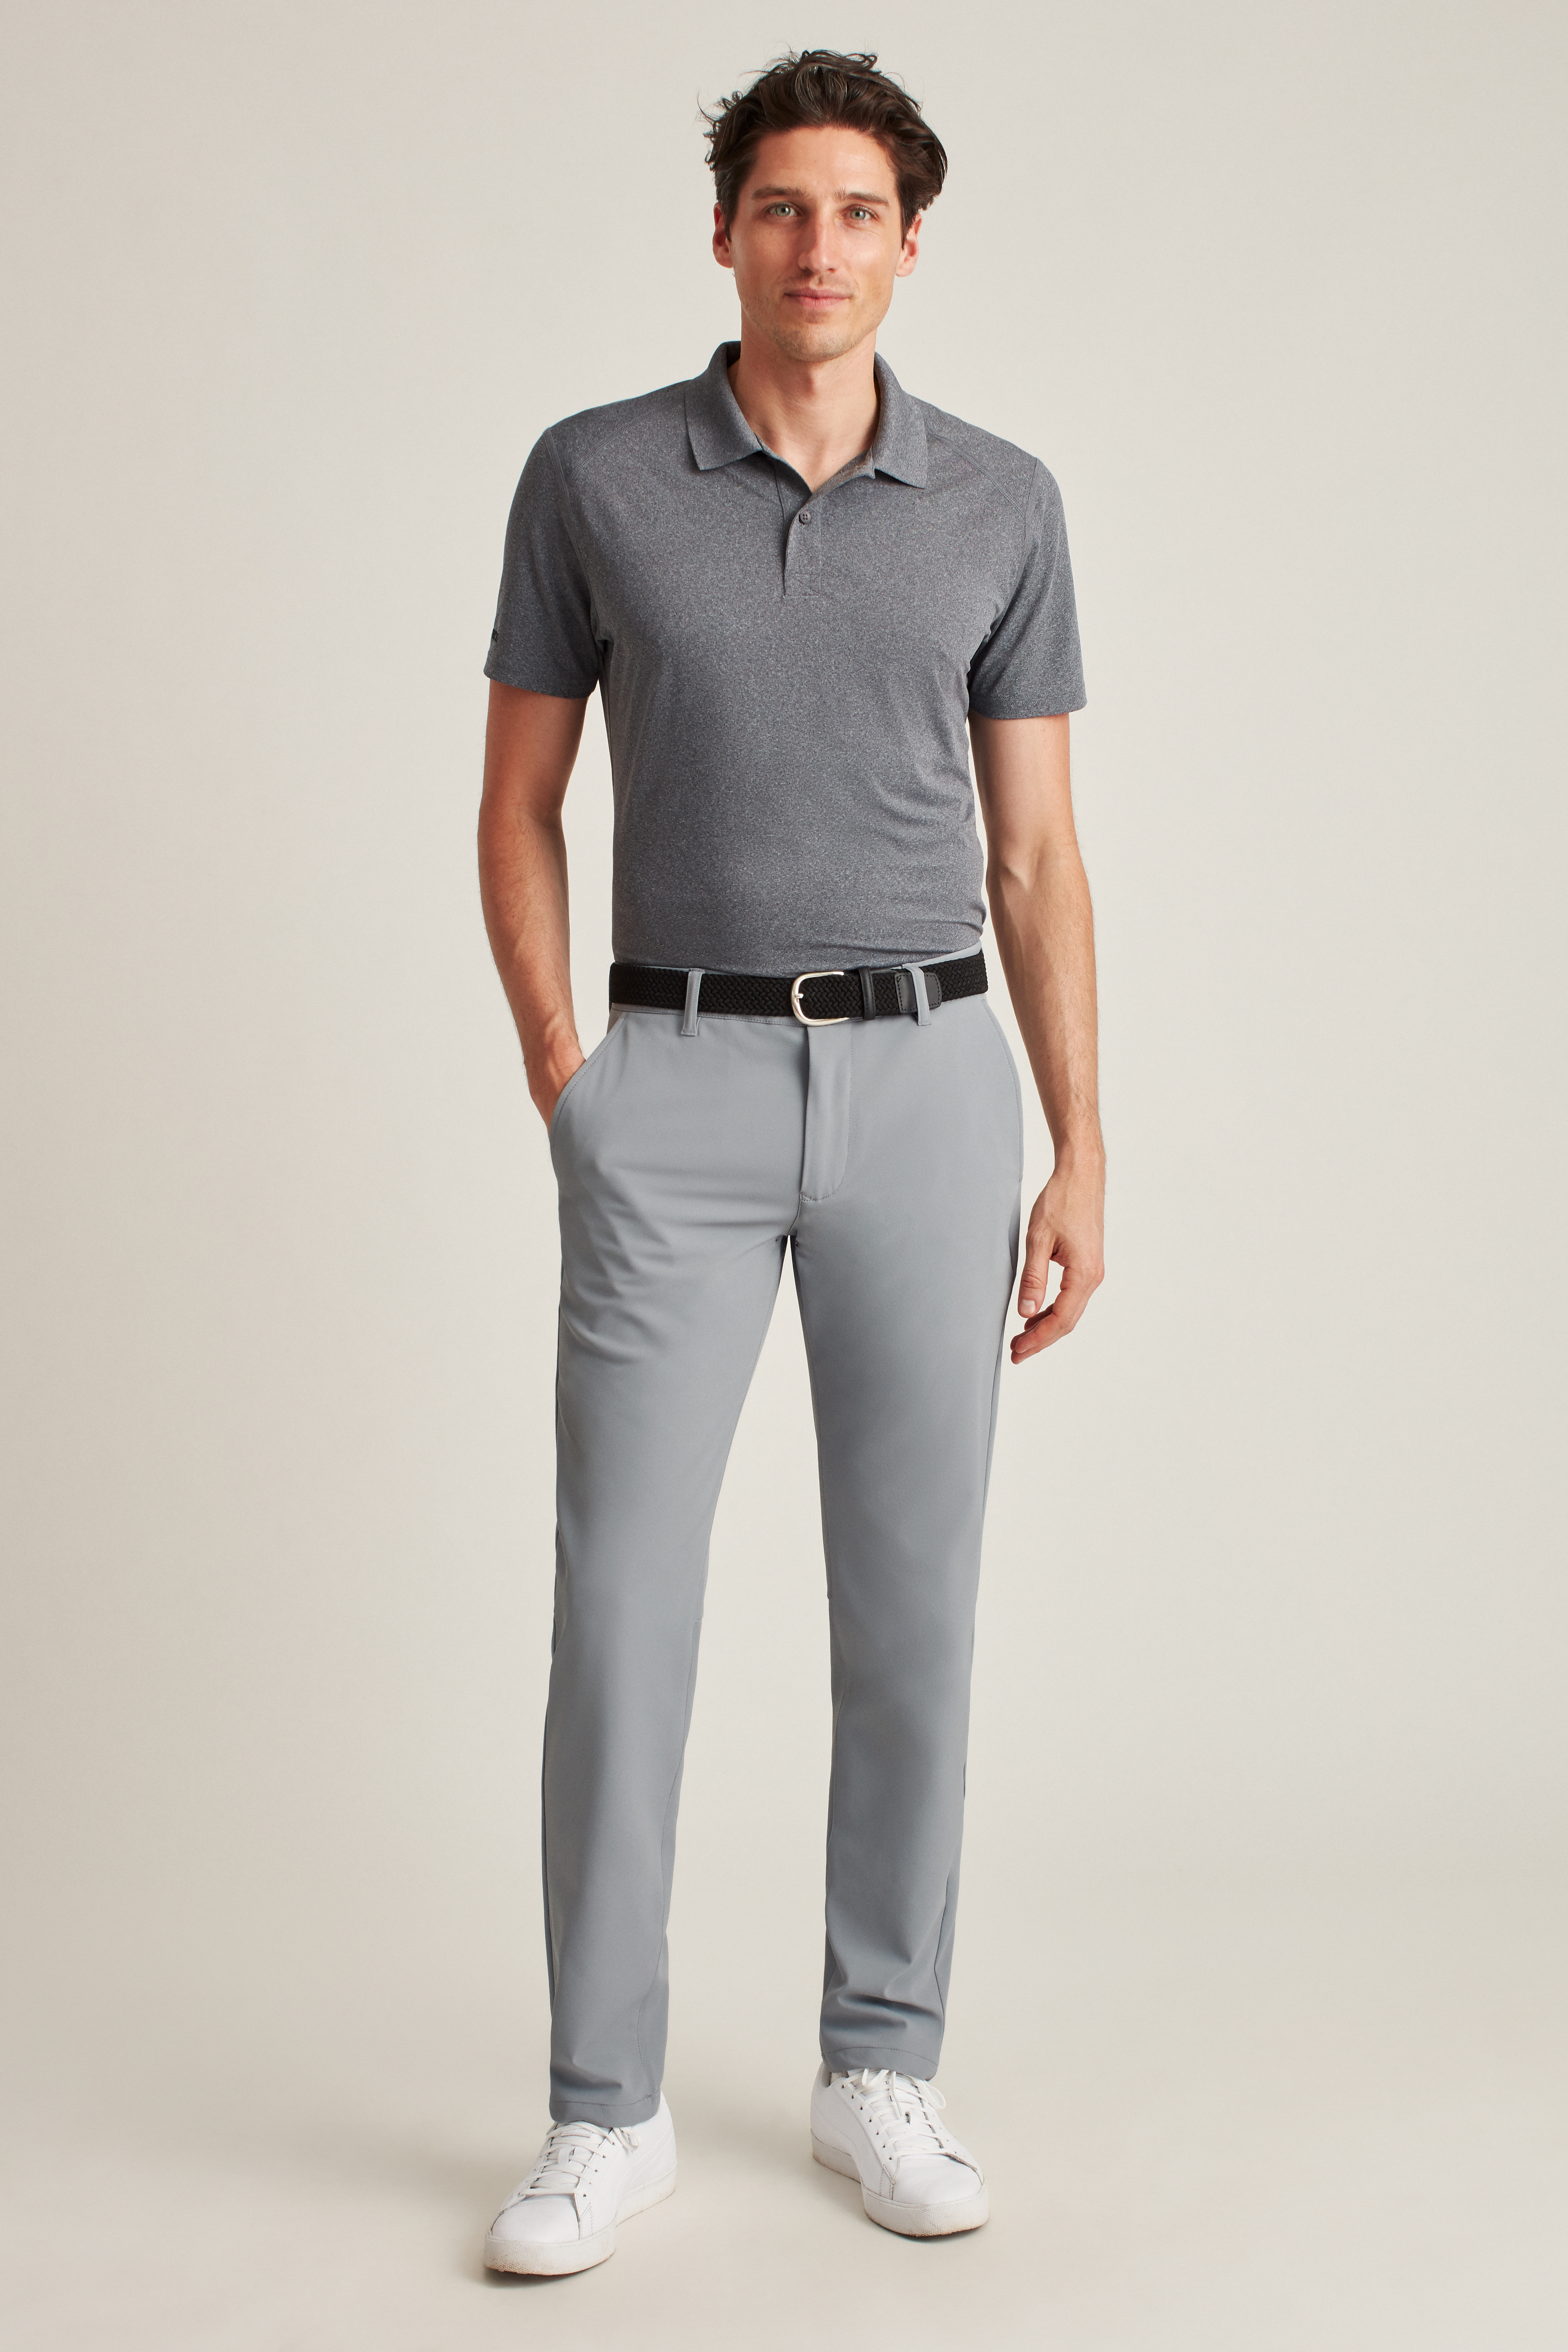 25 Best Golf Clothing Brands  Man of Many